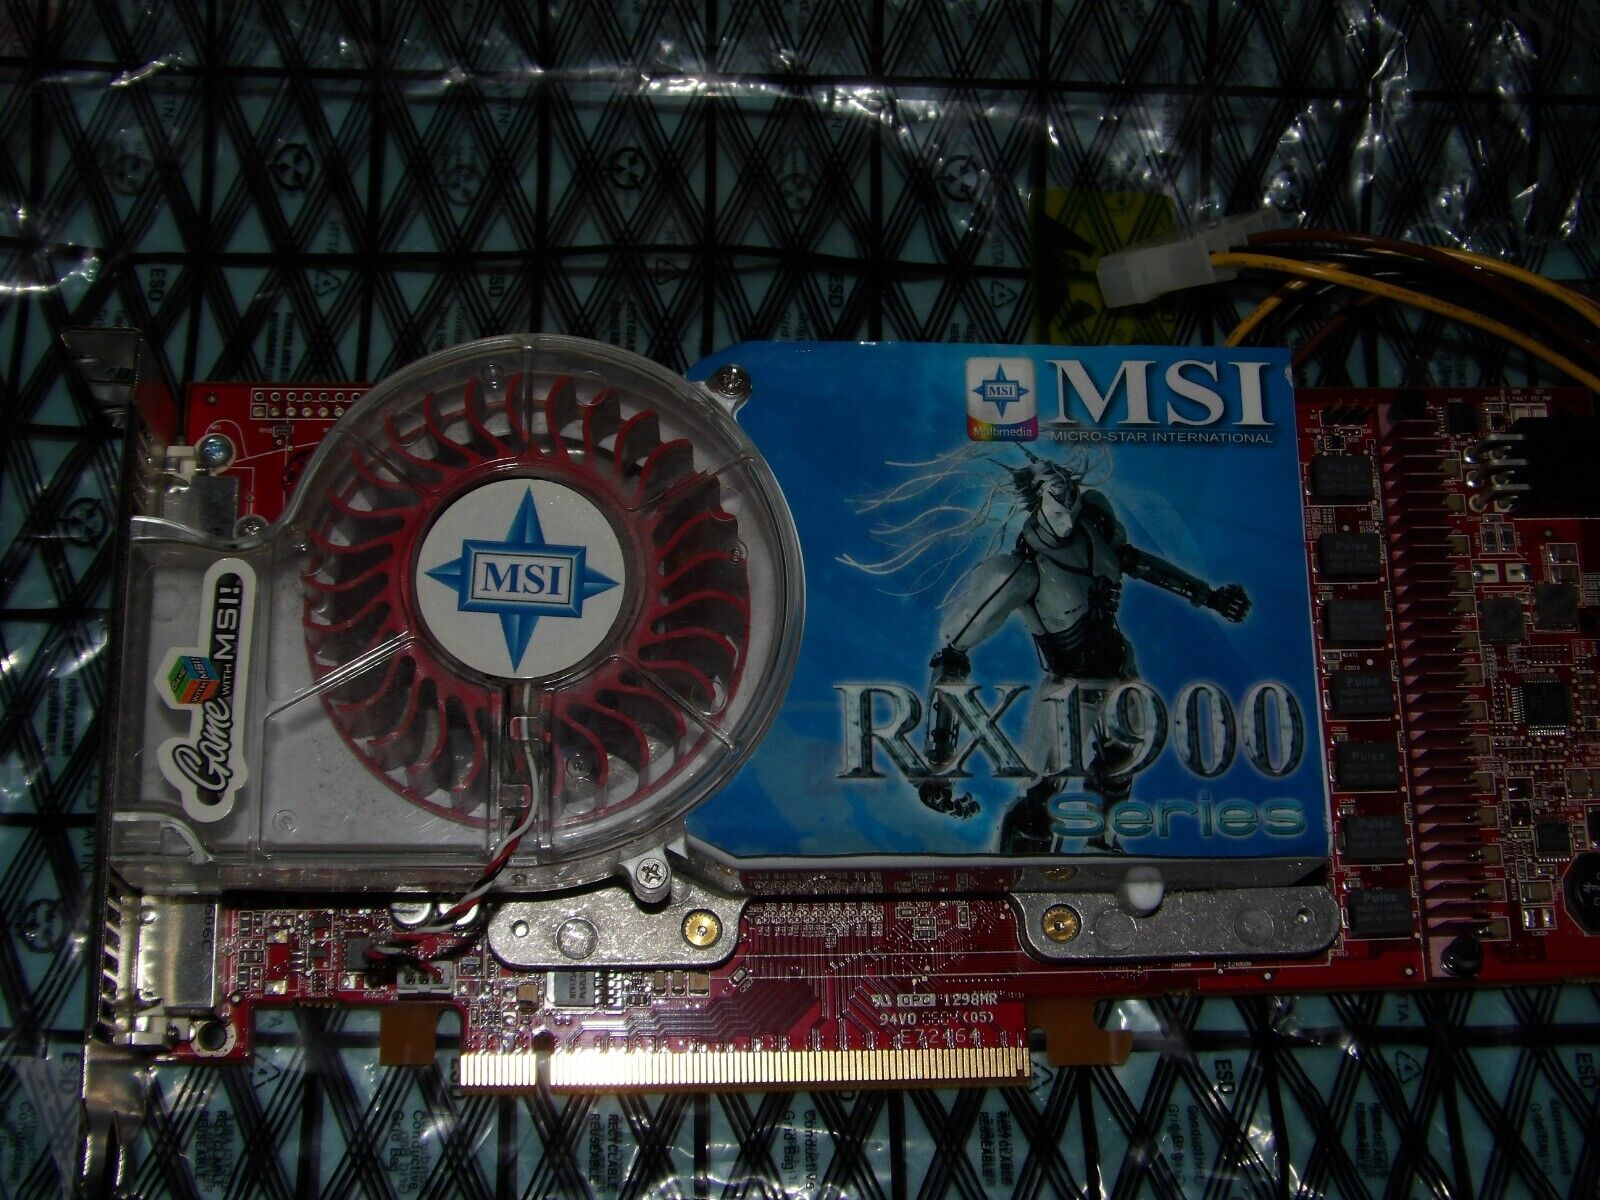 MSI Radeon RX 1900 Series Video Card in MINT condition Rarely used